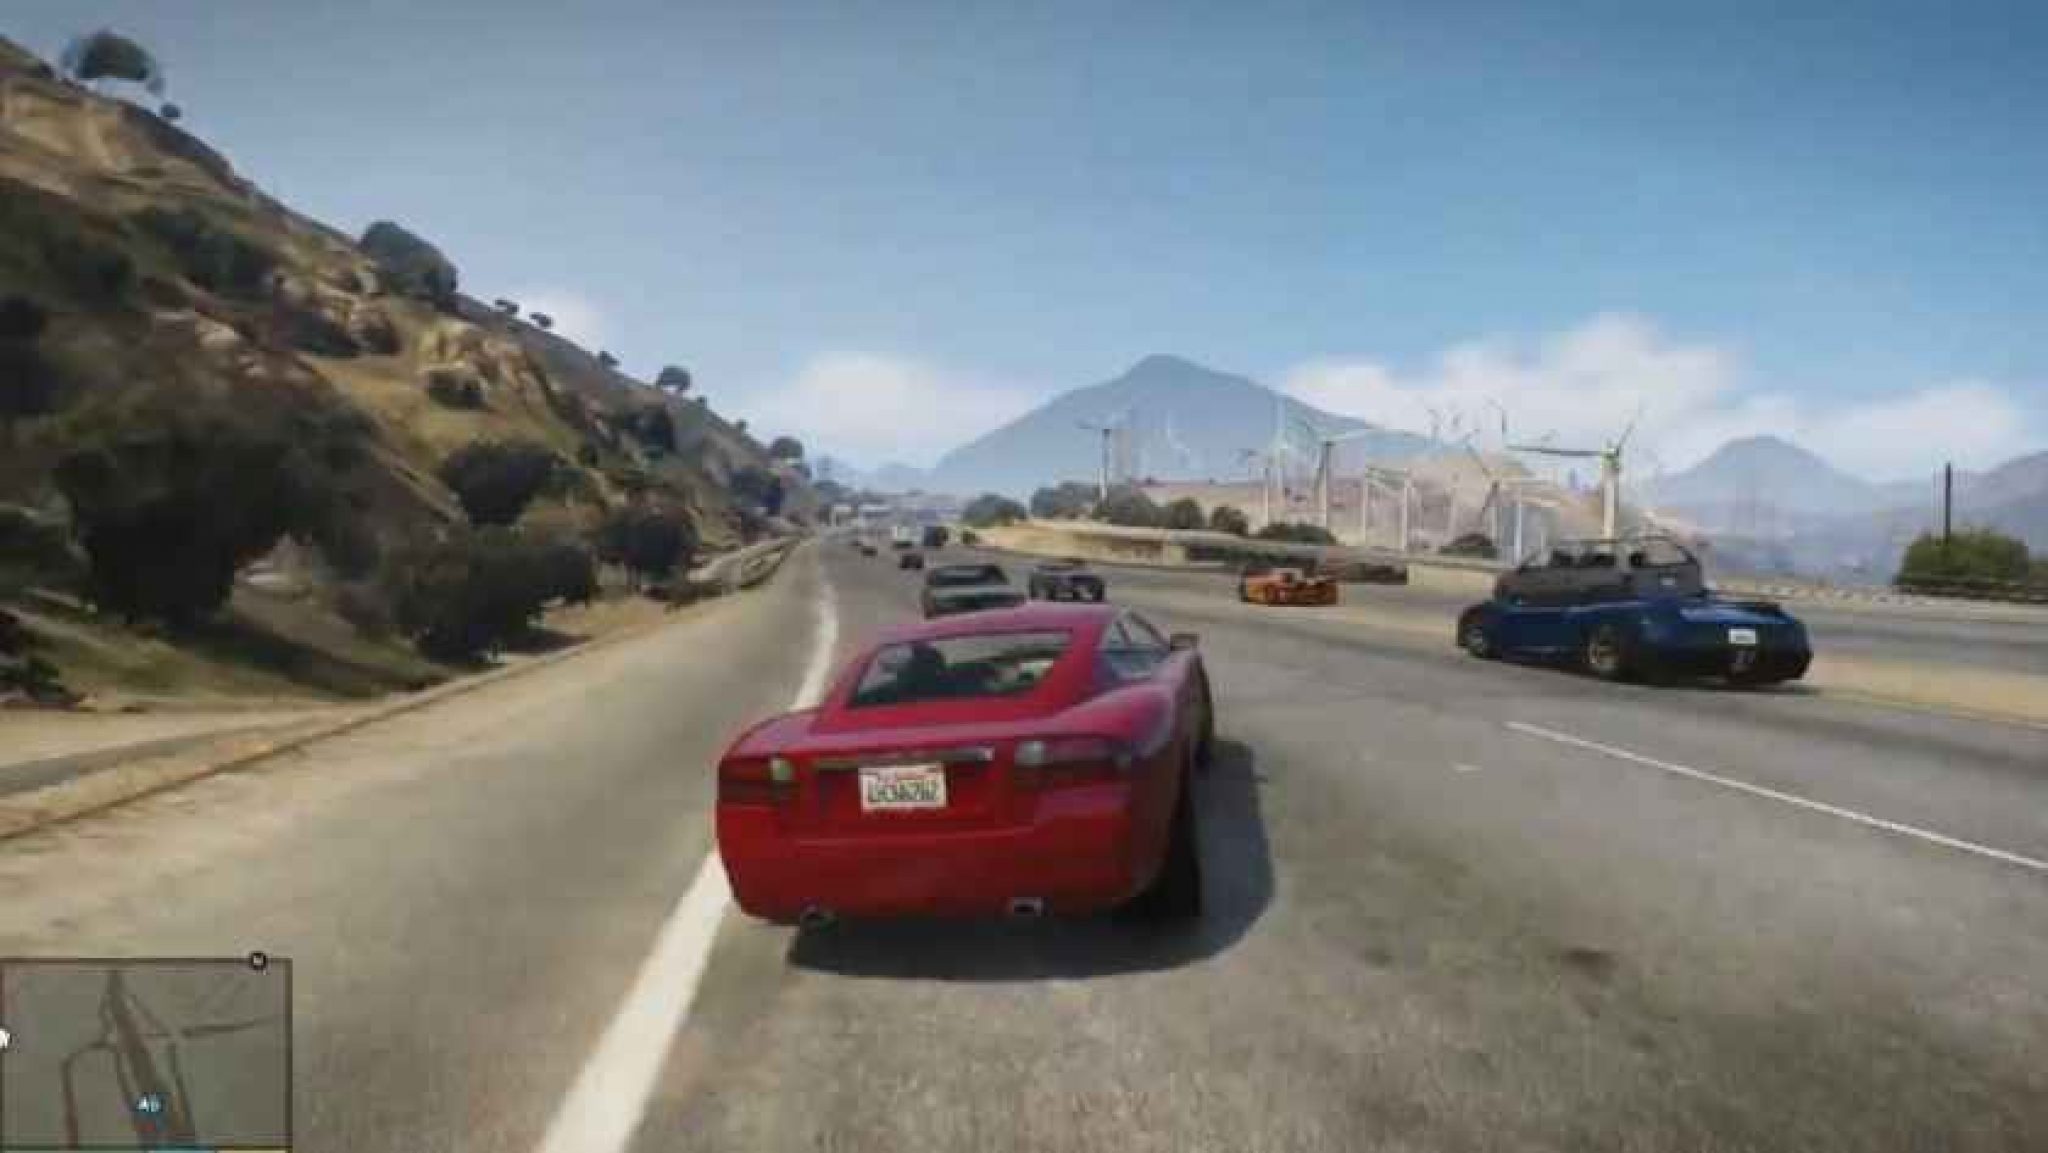 gta 5 free download pc highly compressed